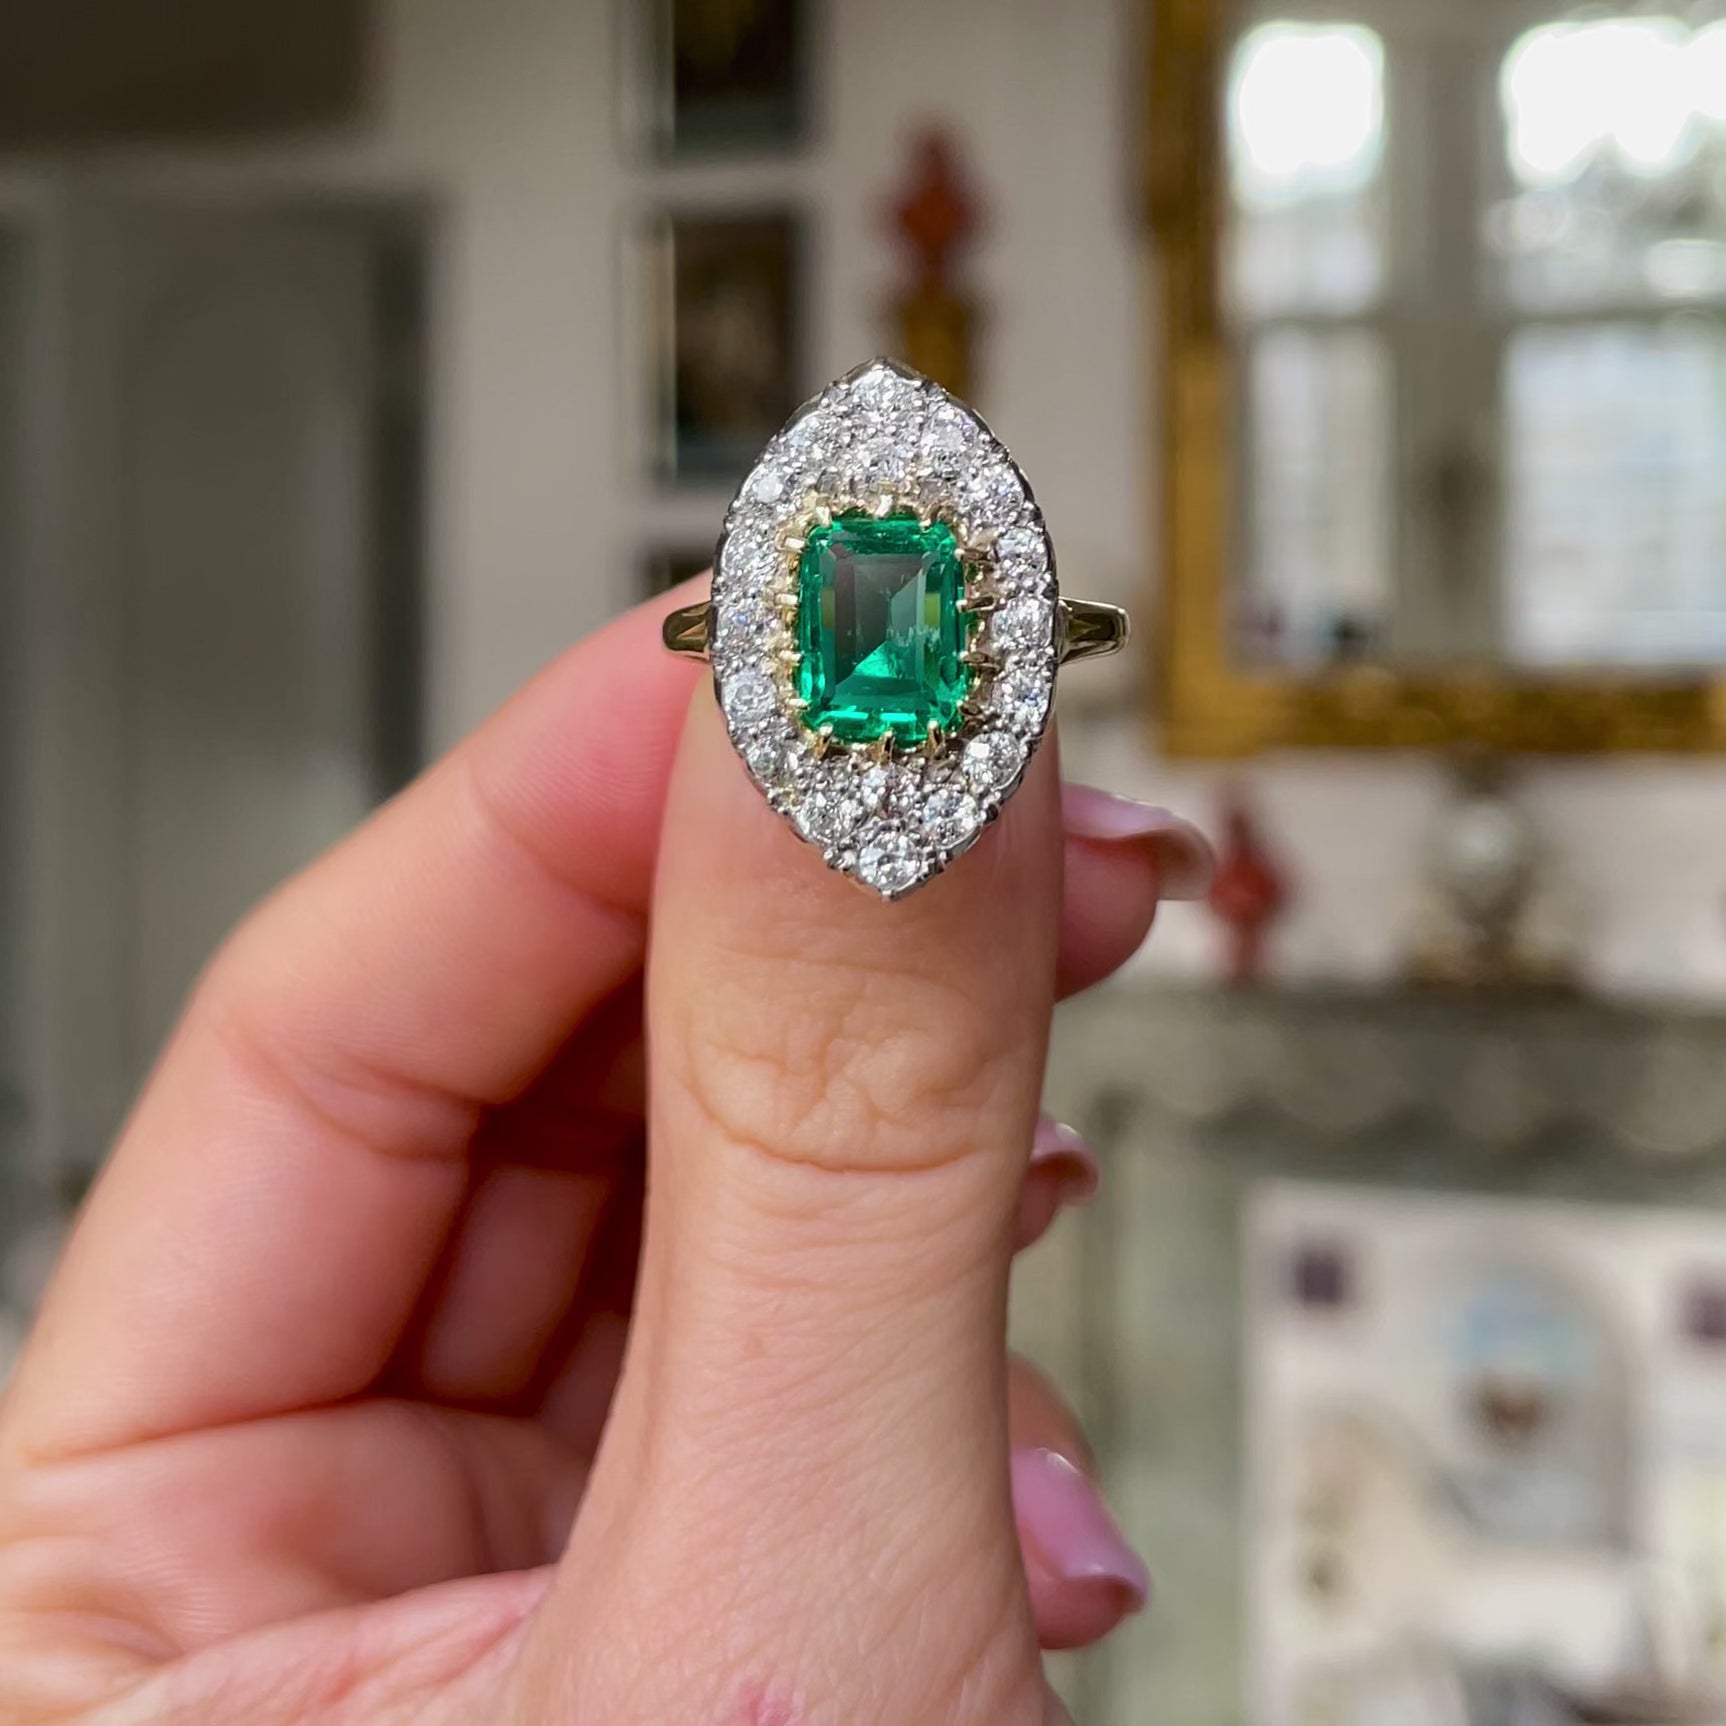 Emerald and diamond navette ring, held in fingers and rotated to give perspective.